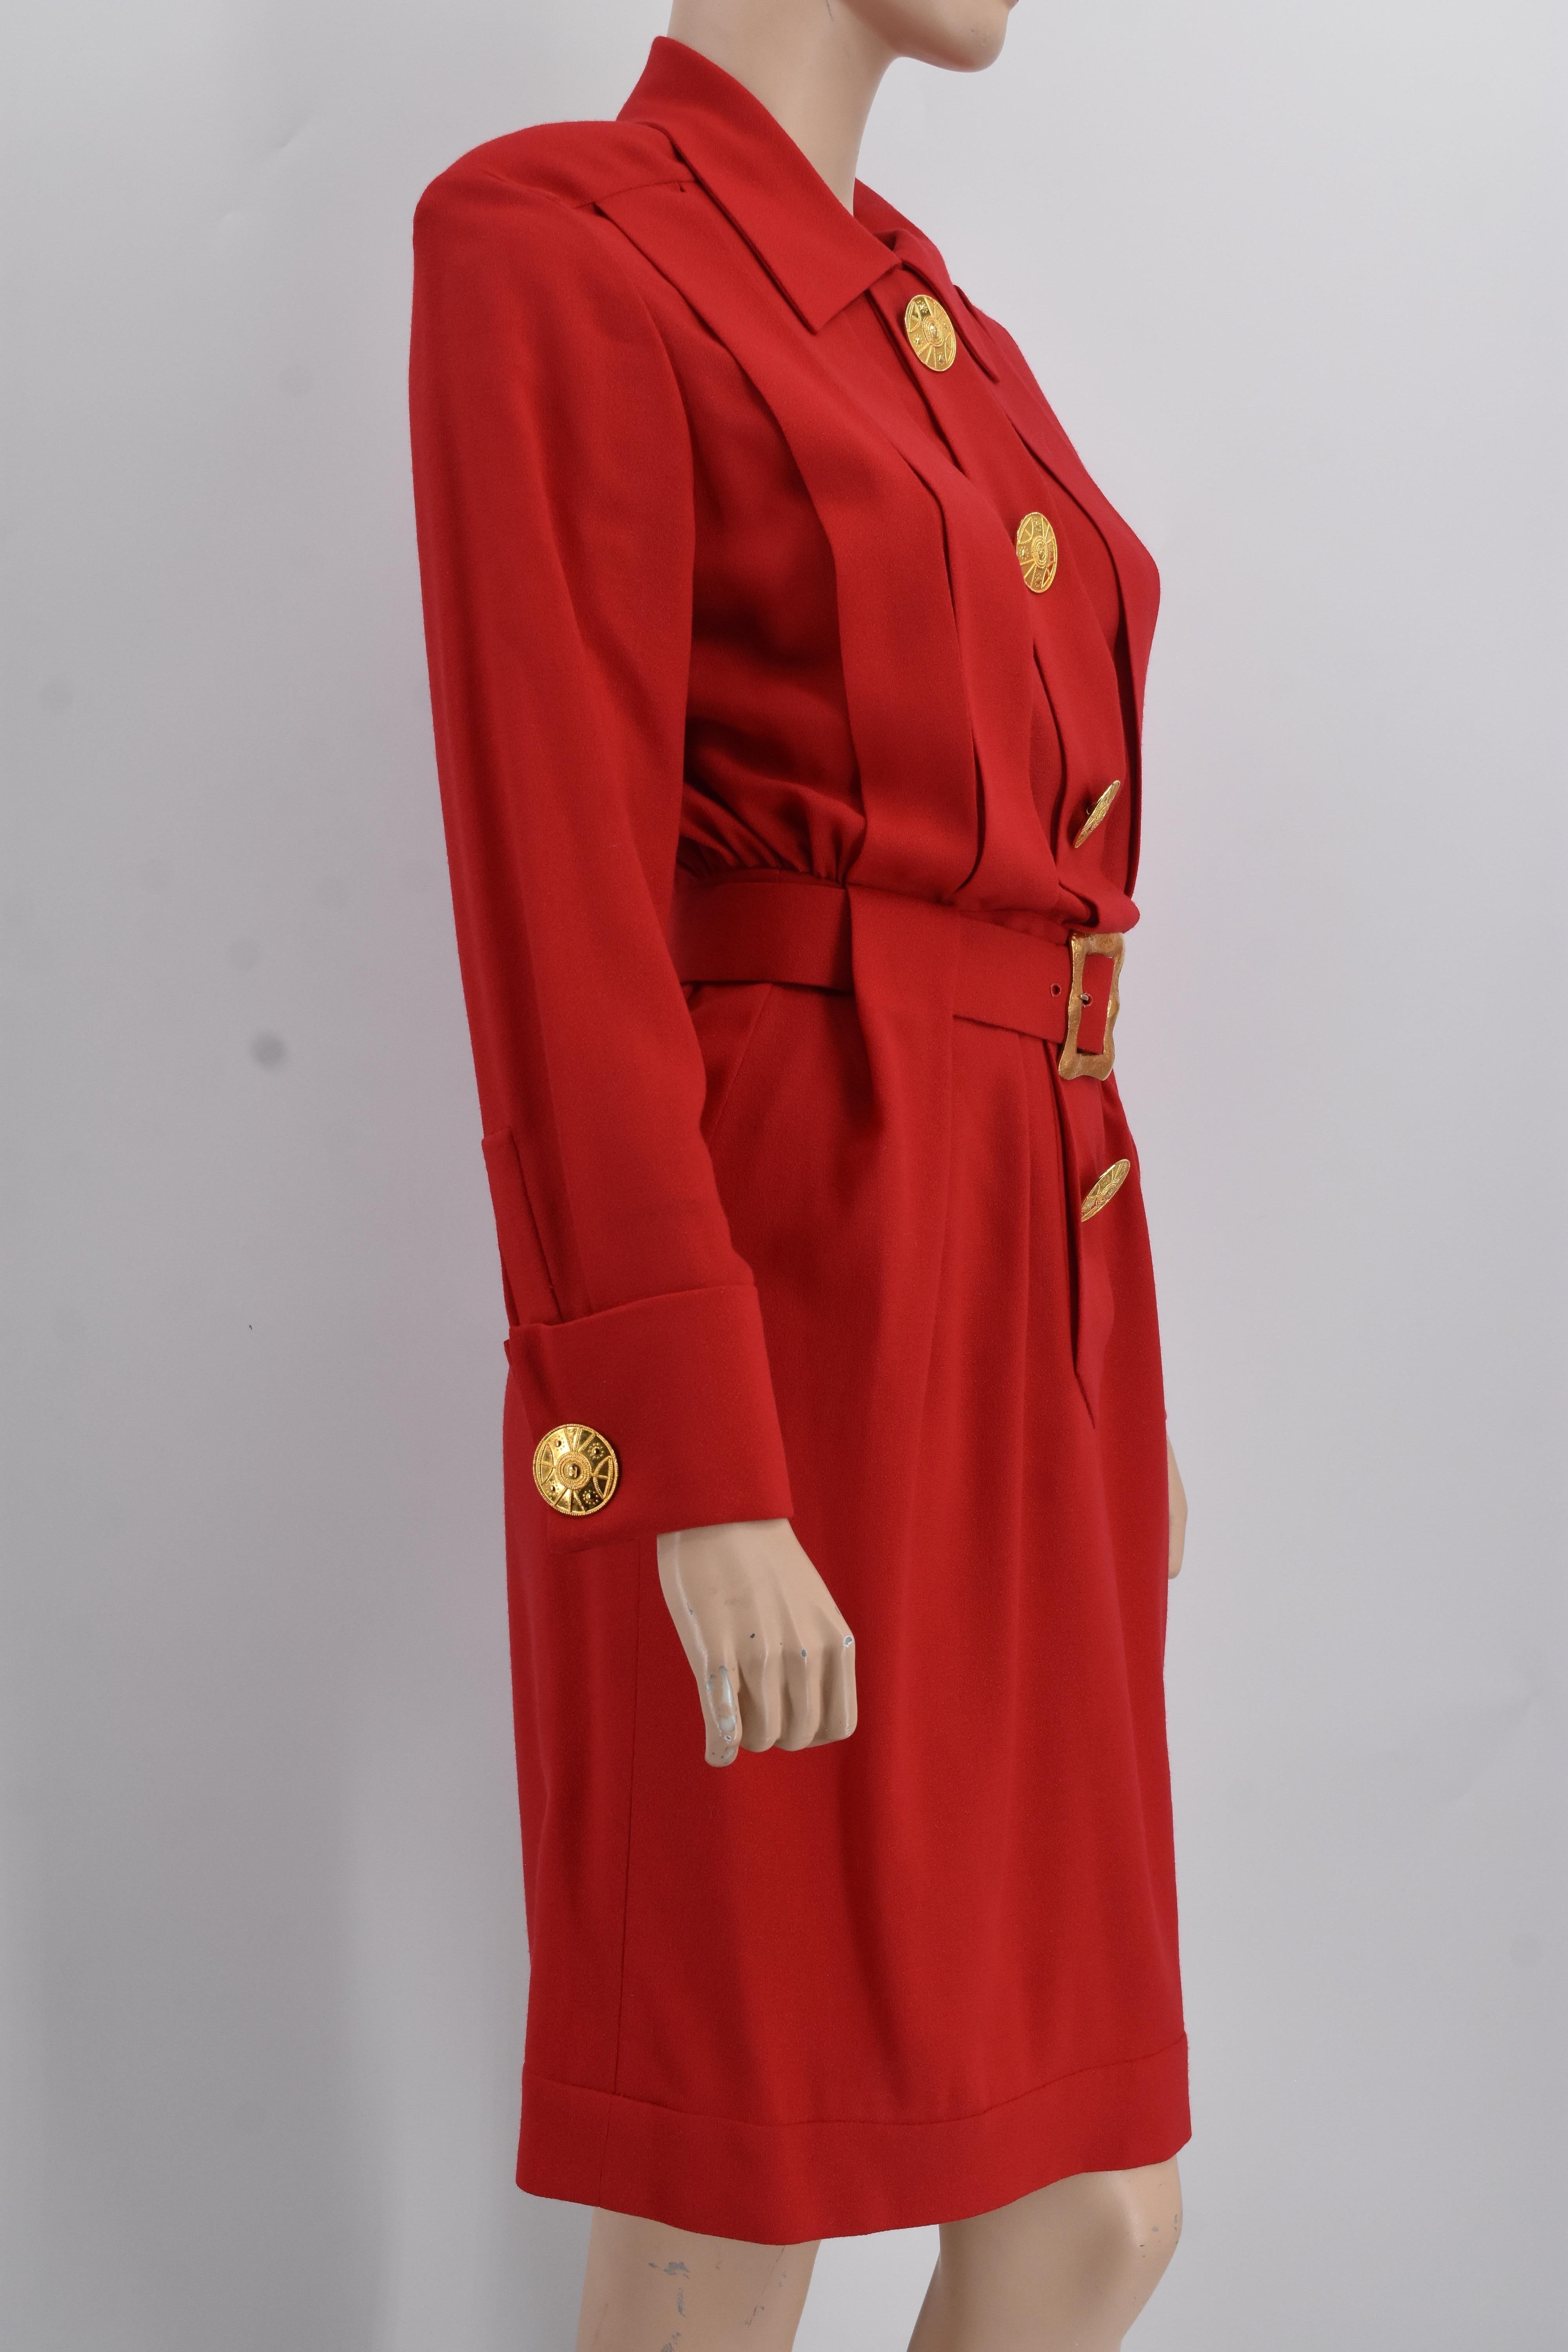 Chanel Boutique elegant Red Dress 38 Mint In Excellent Condition For Sale In Merced, CA